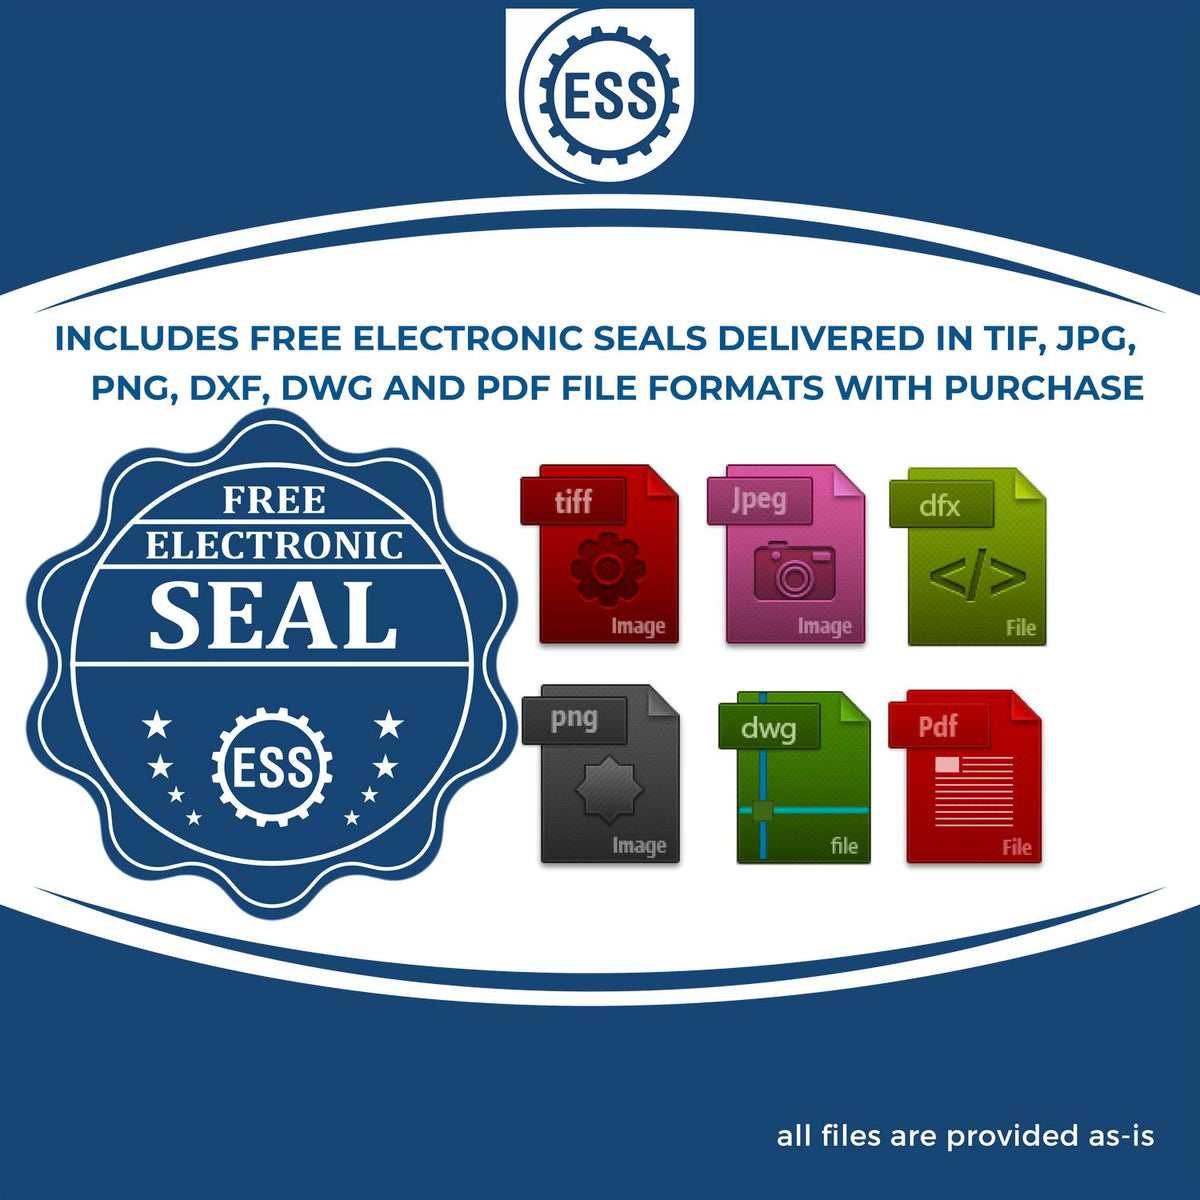 An infographic for the free electronic seal for the Hybrid Kentucky Land Surveyor Seal illustrating the different file type icons such as DXF, DWG, TIF, JPG and PNG.